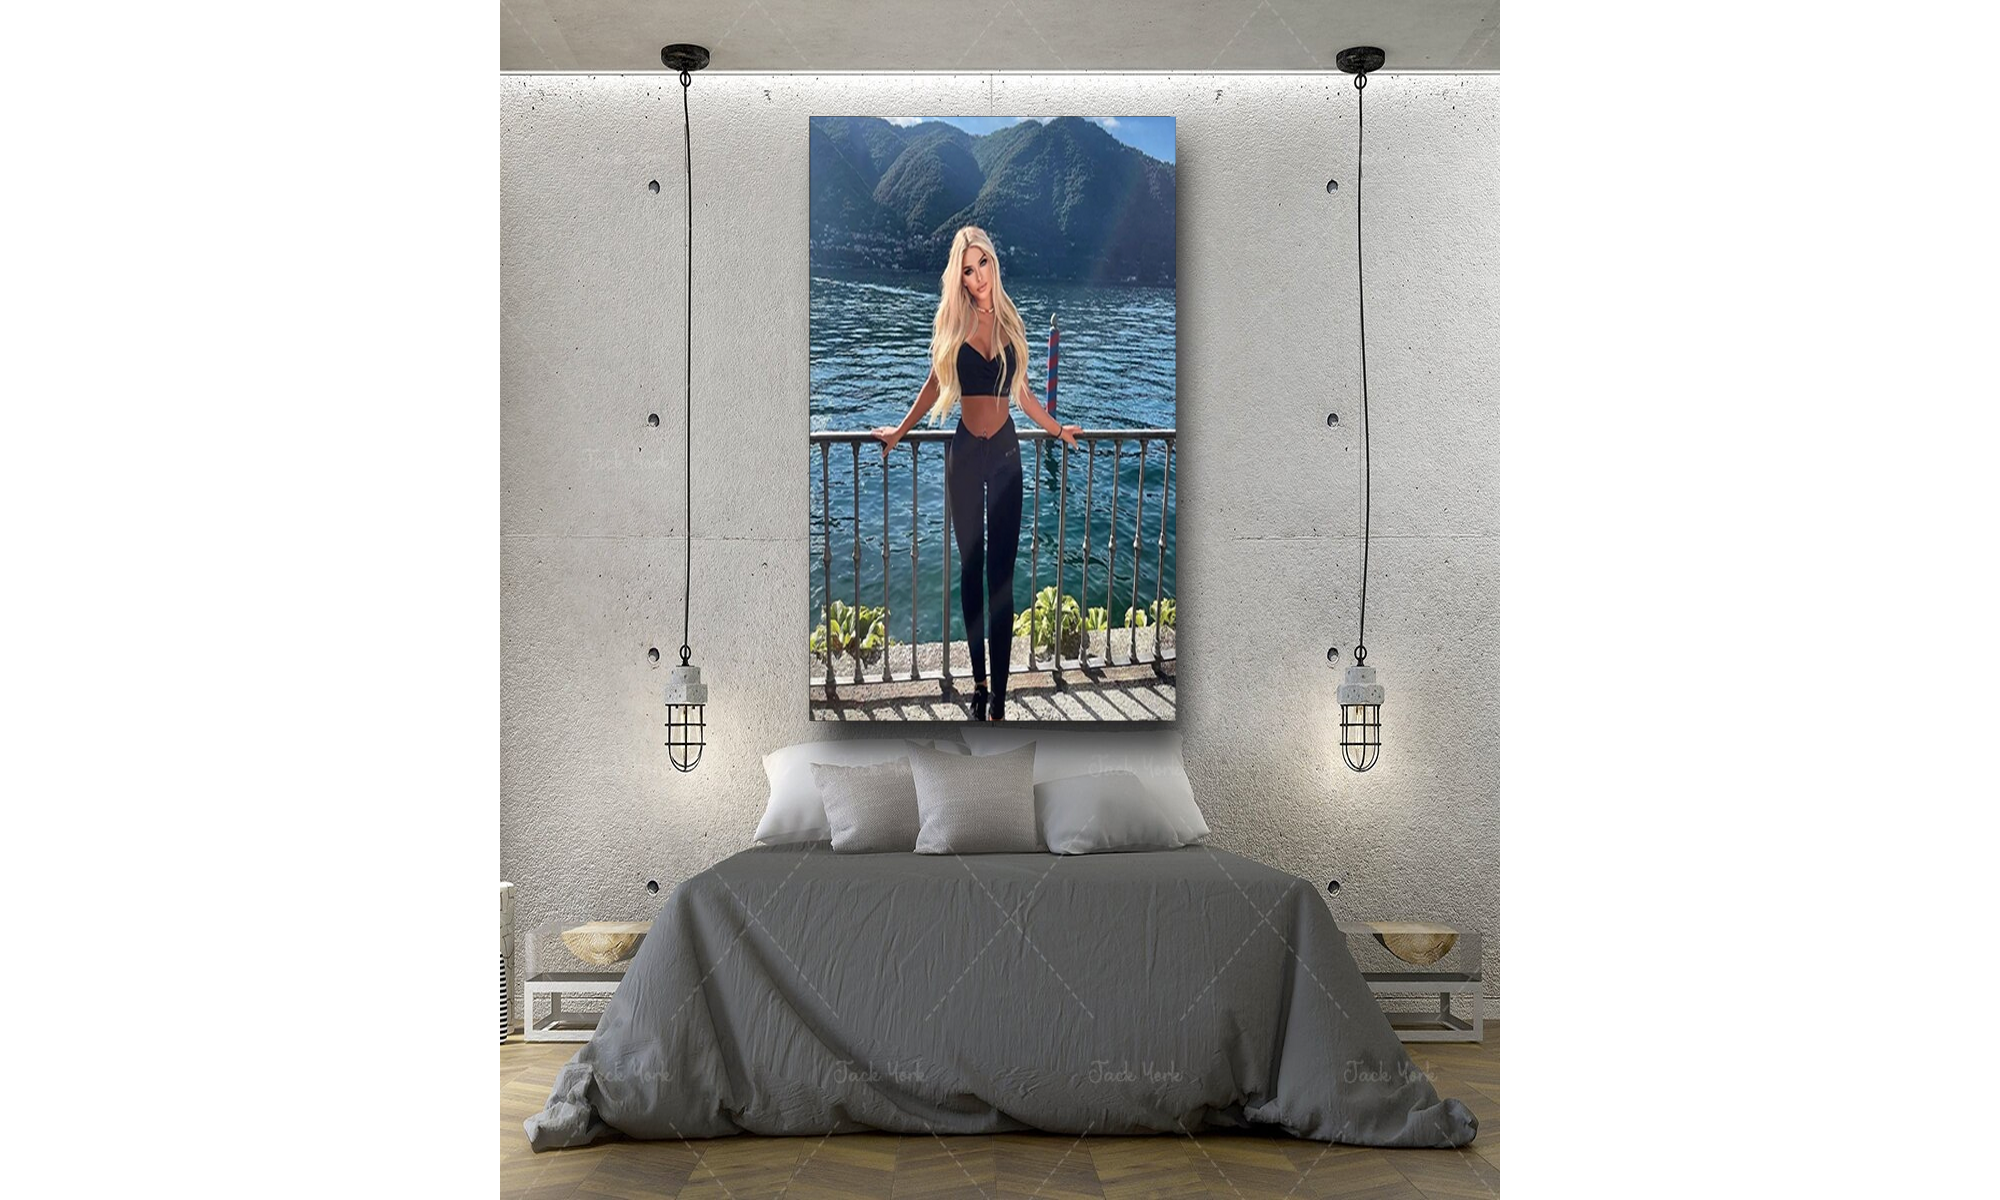 Awesome Nais S Model Business Women Canvas Home Wall Art Millionaire Awesome Nais Canvas